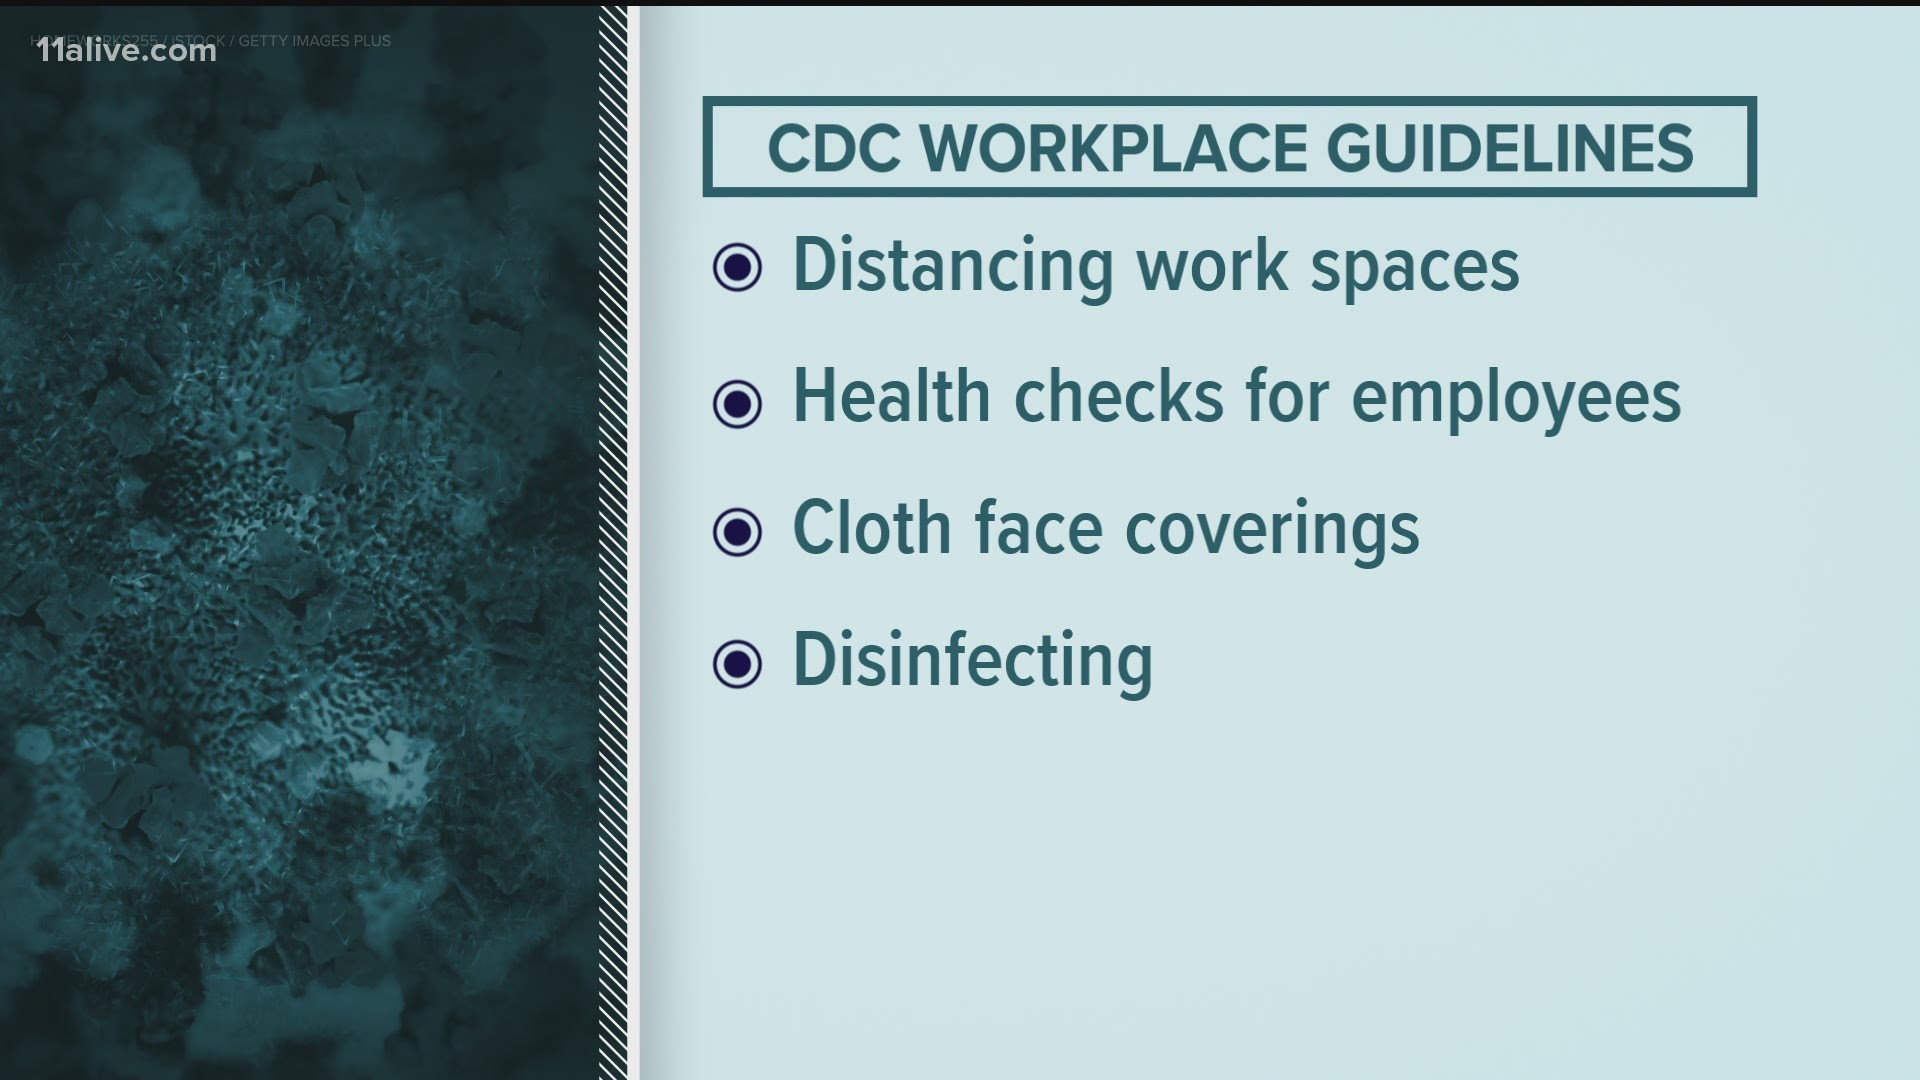 Here's what the CDC suggests.